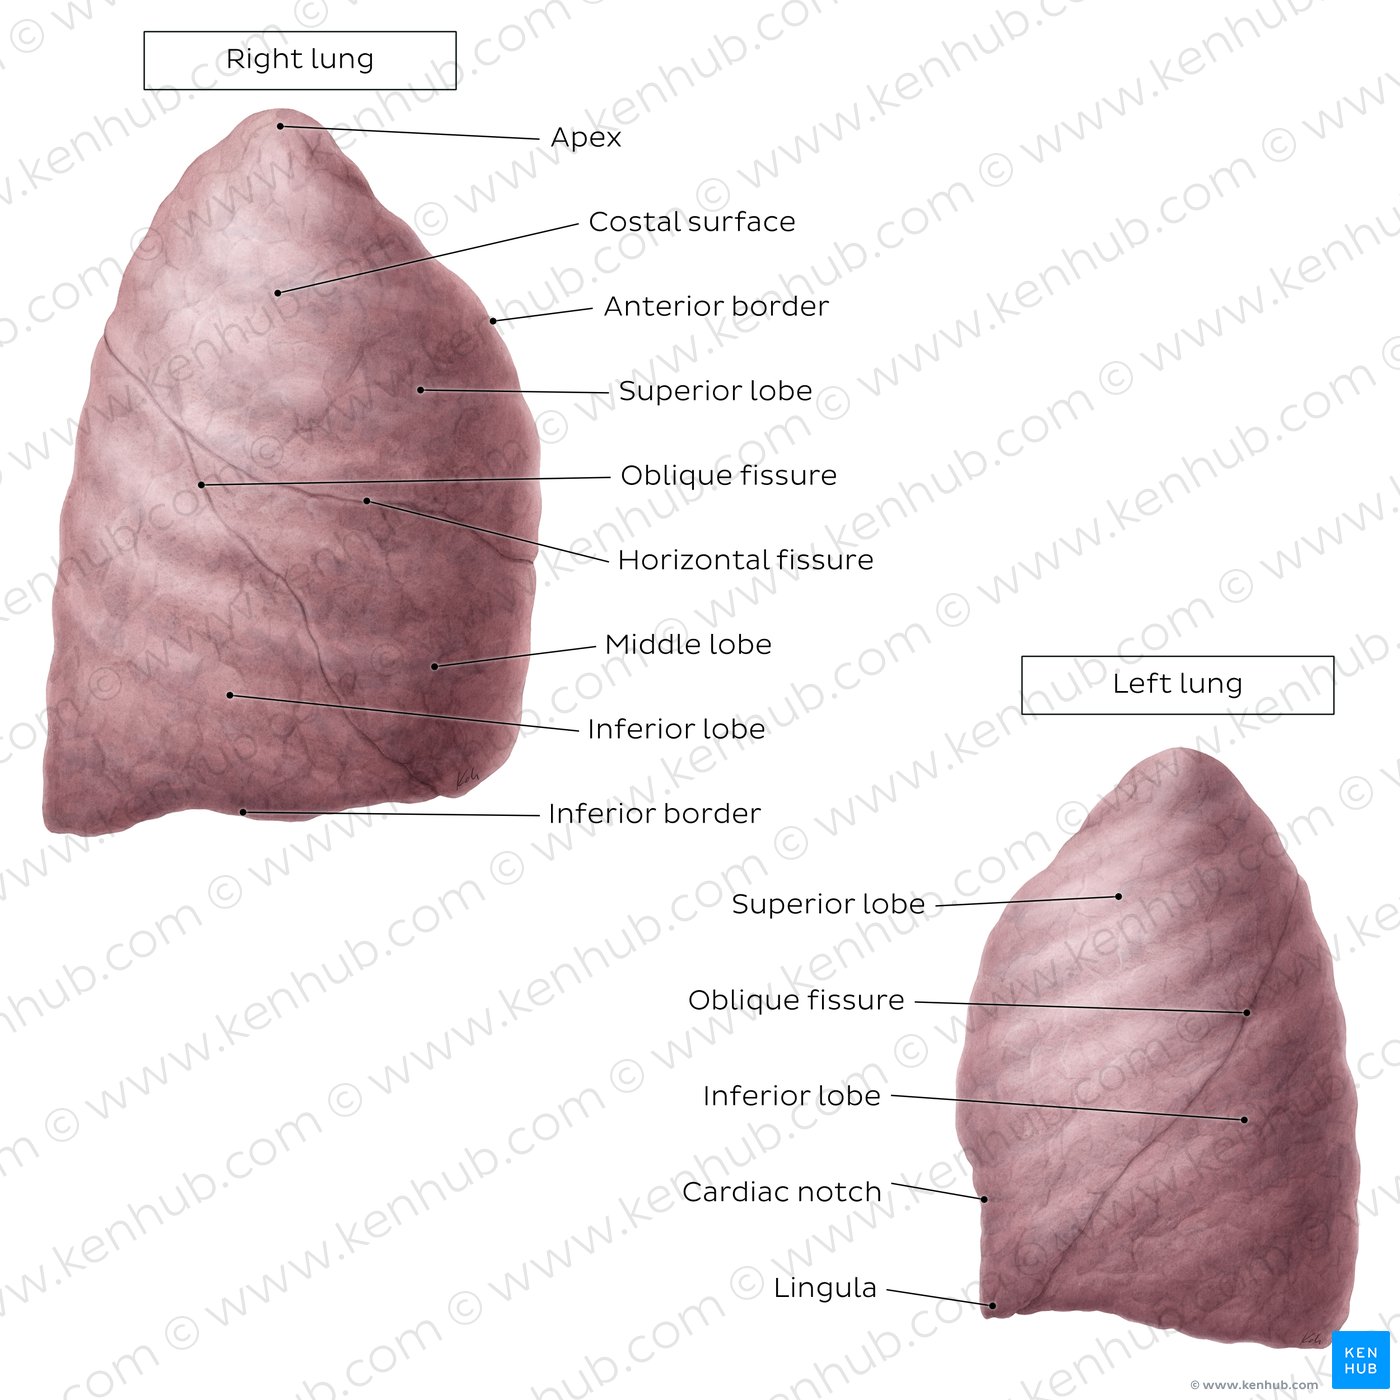 Overview of the lateral view of the lungs